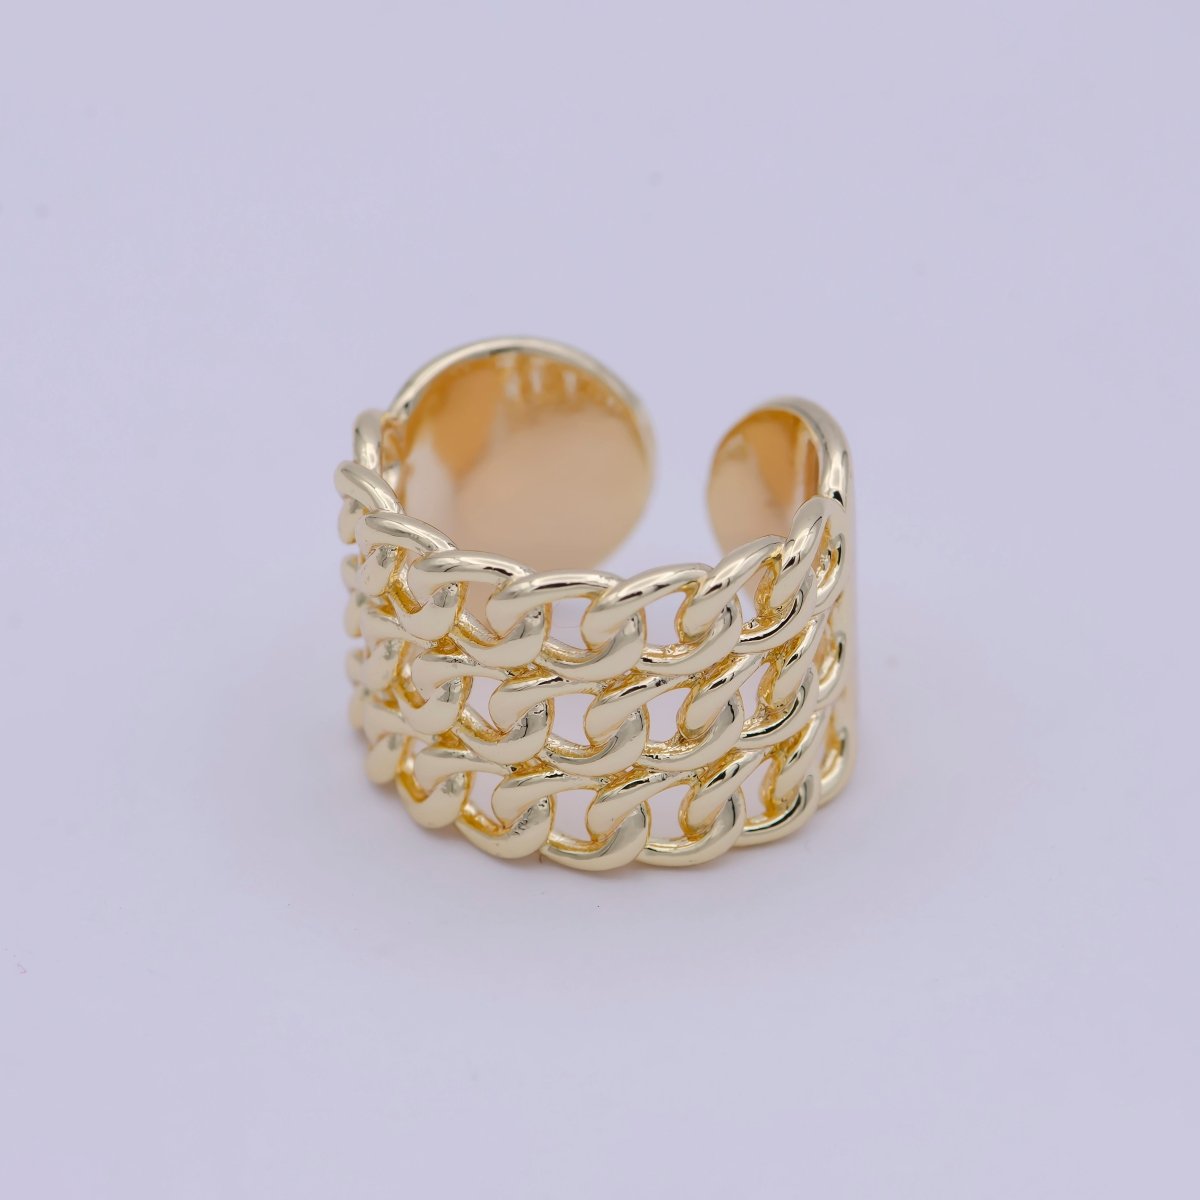 OS 24K Gold Filled Curb Chain Ring, Adjustable Triple Flat Curb Minimalist Golden Ring S-315 - DLUXCA